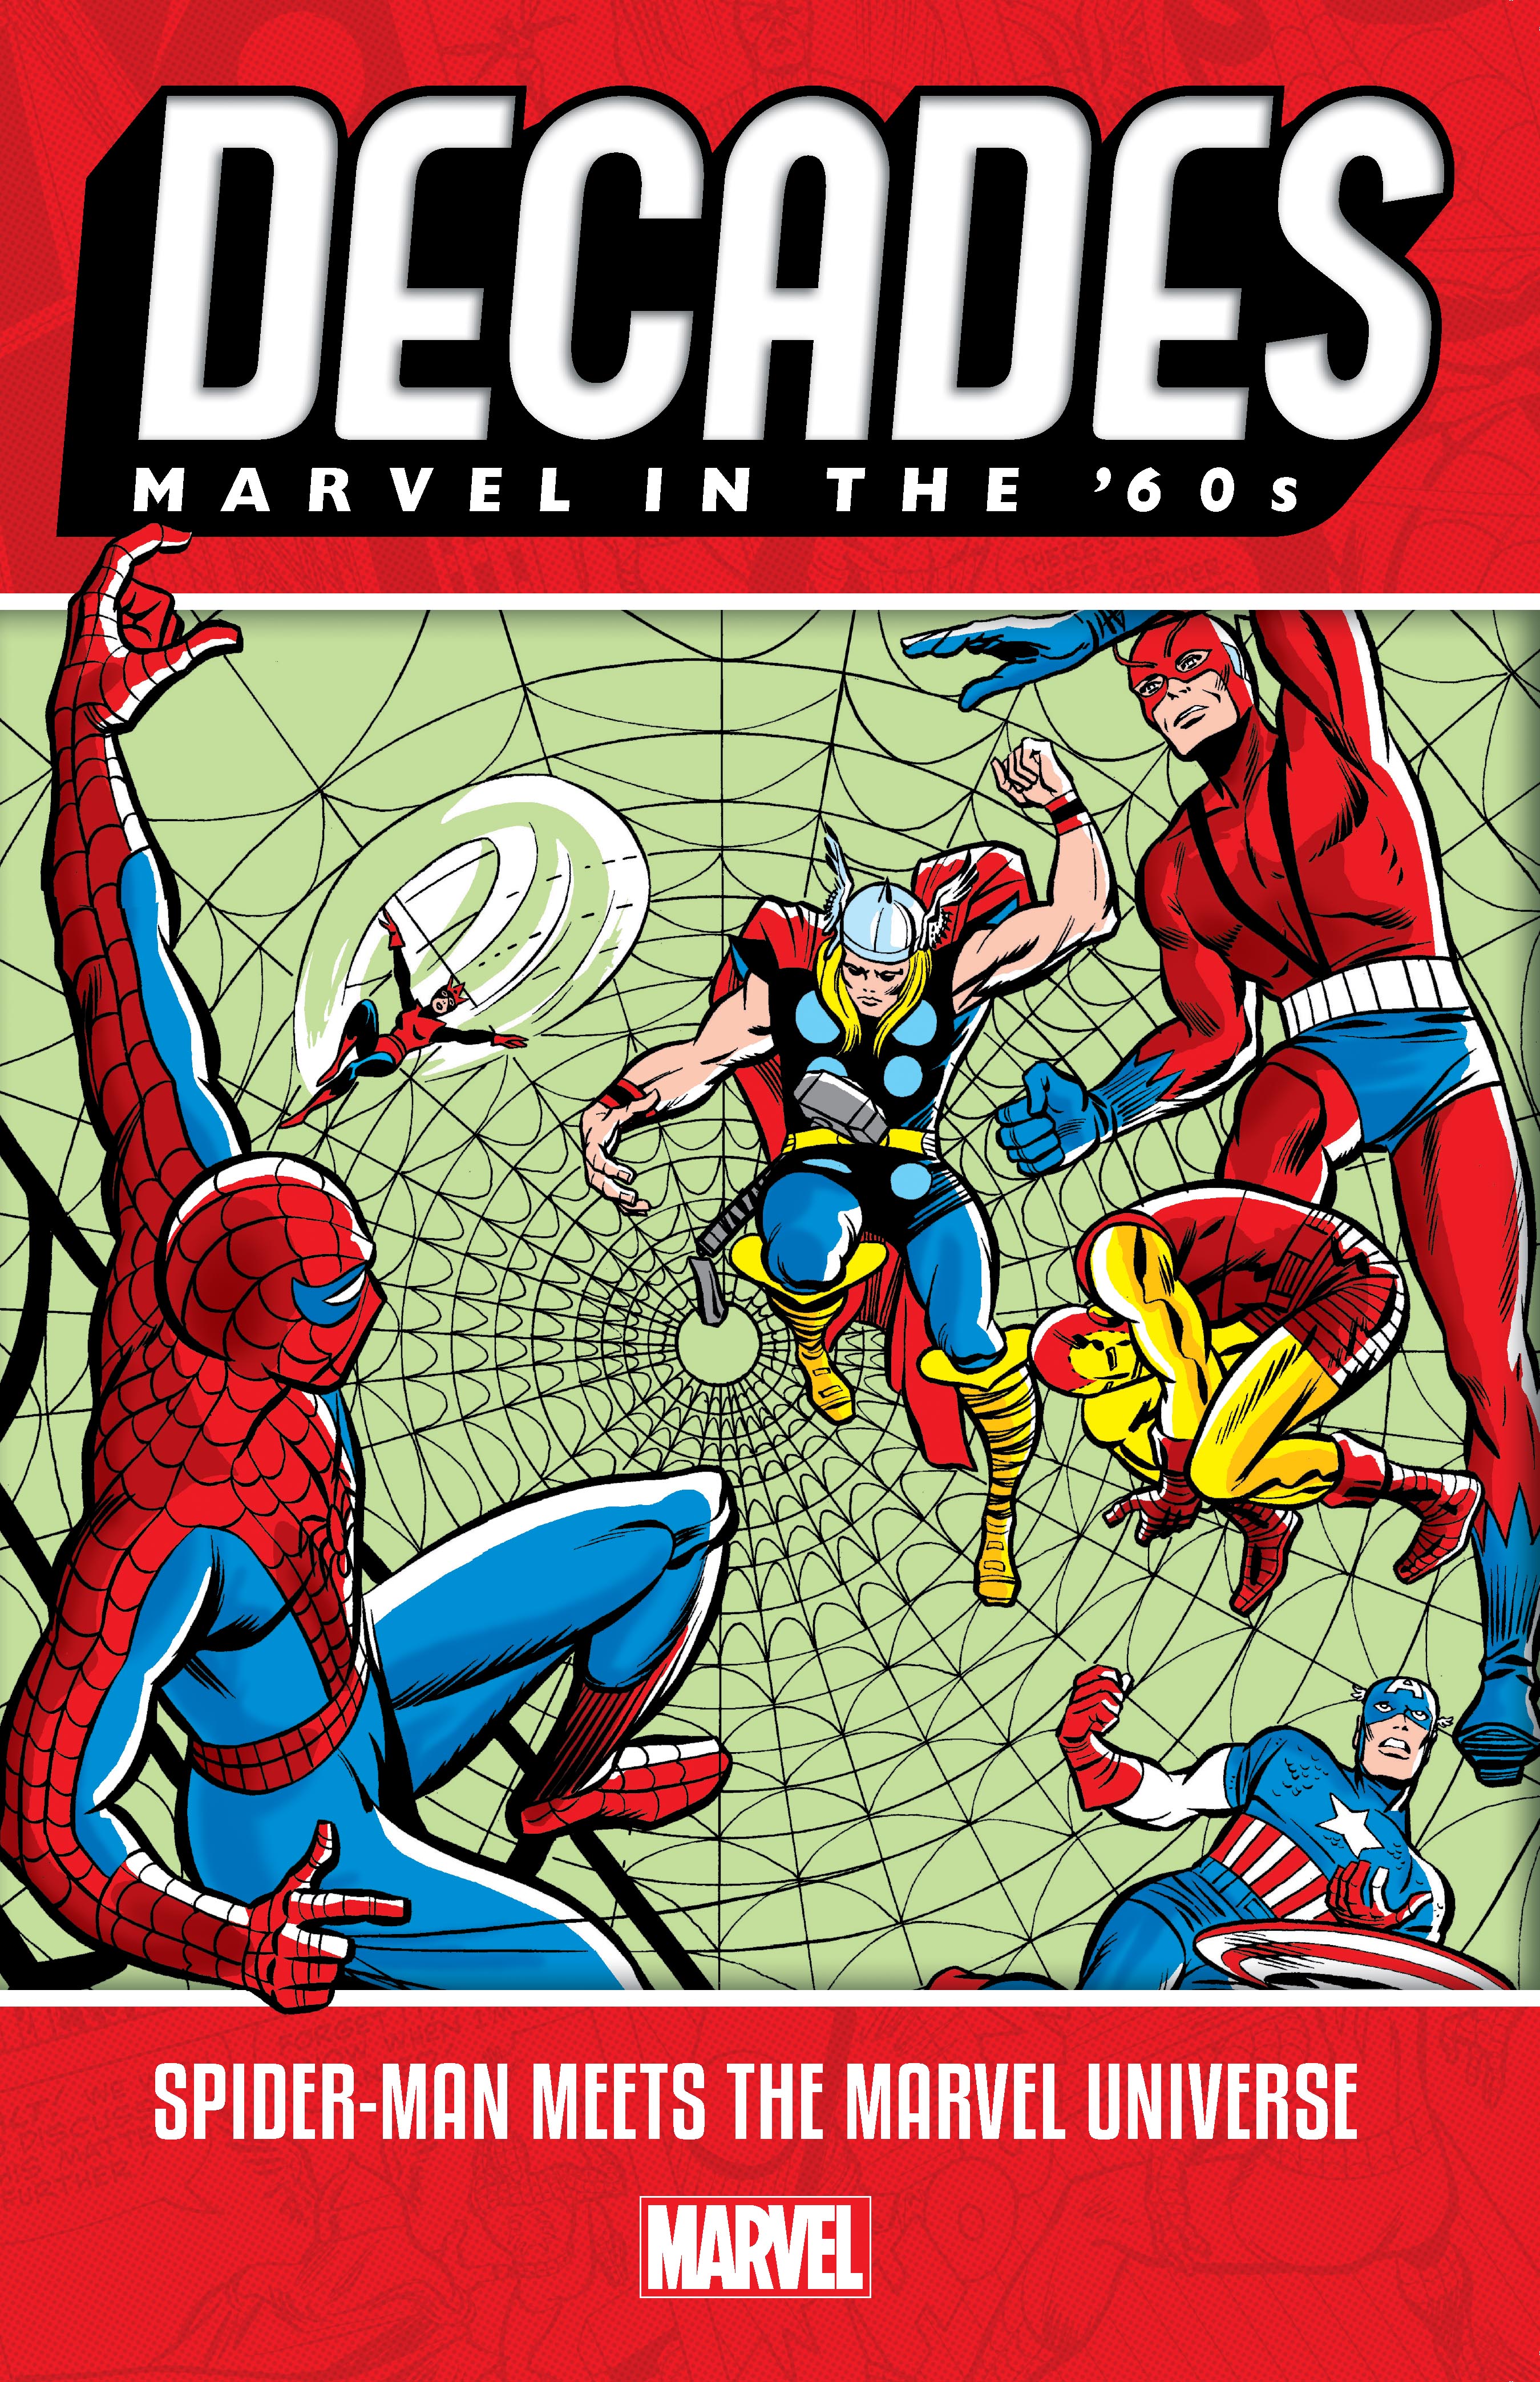 Decades: Marvel In The '60s - Spider-Man Meets The Marvel Universe (Trade Paperback)